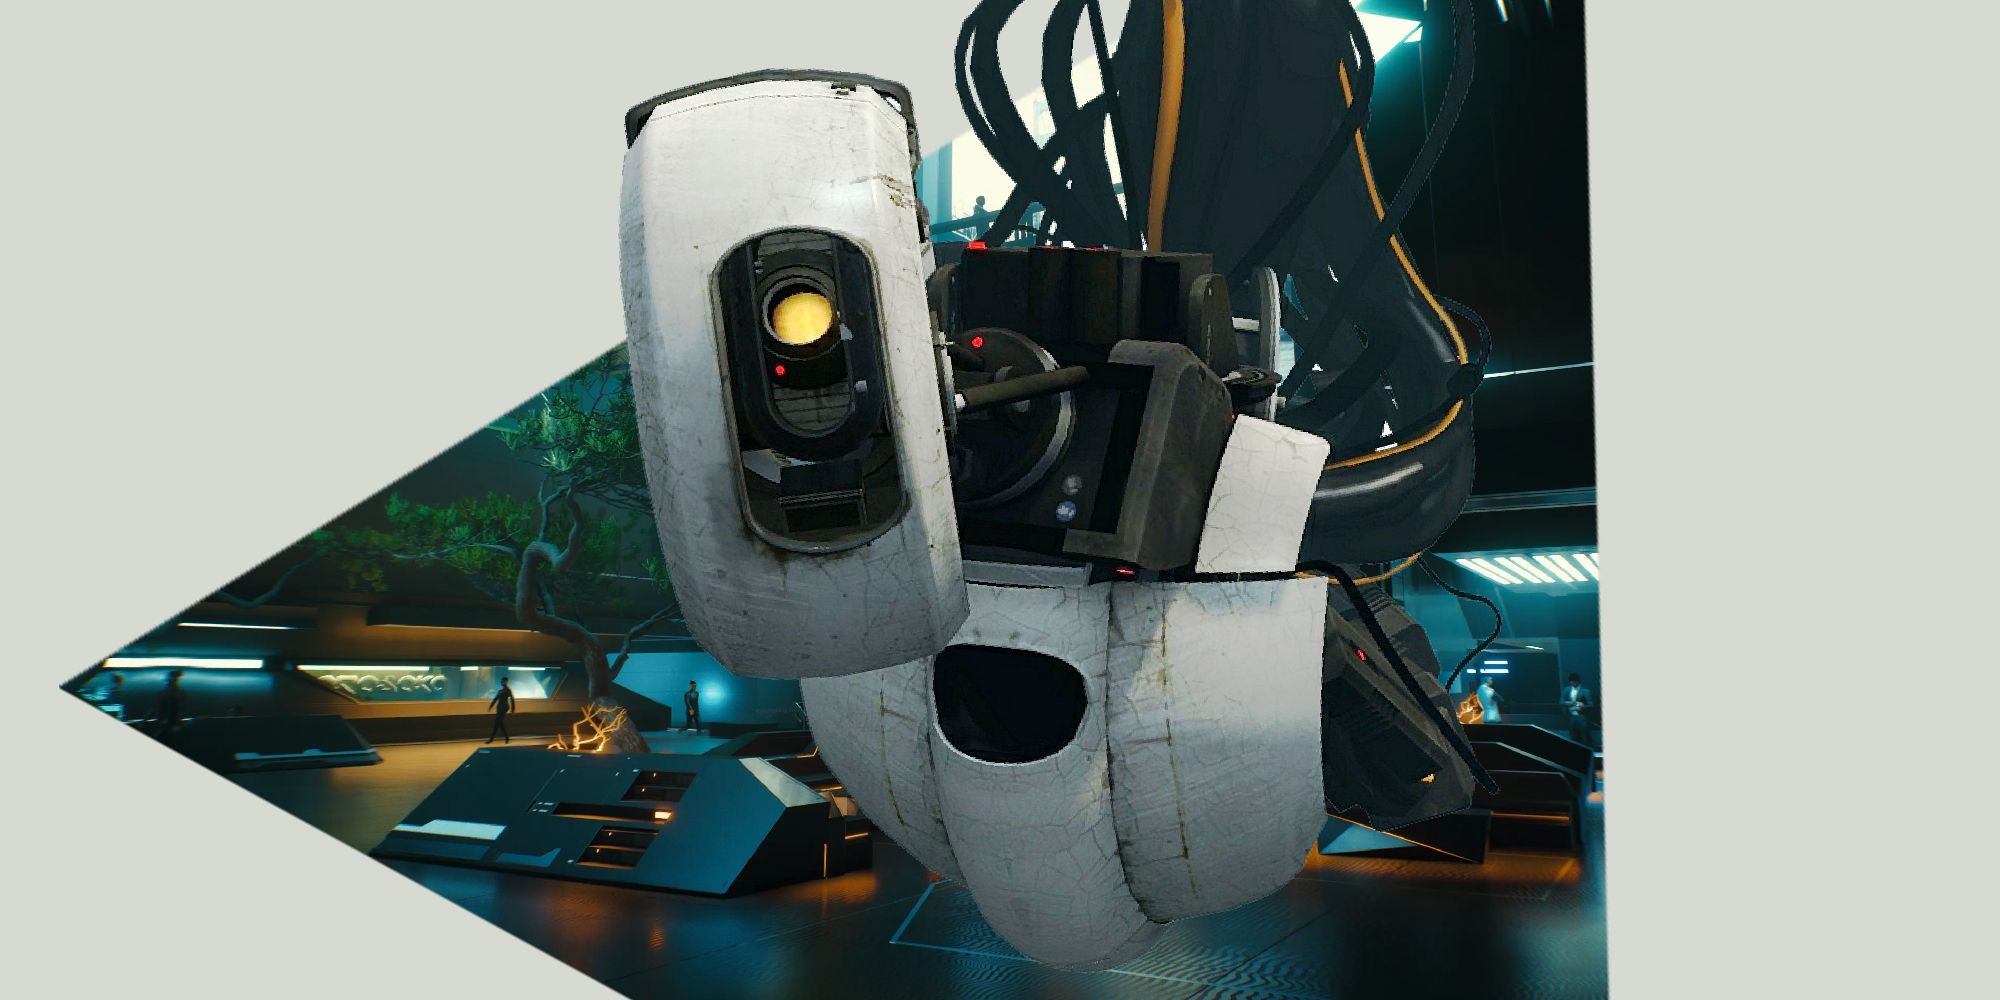 Glados from Portal against a backdrop from Cyberpunk 2077.